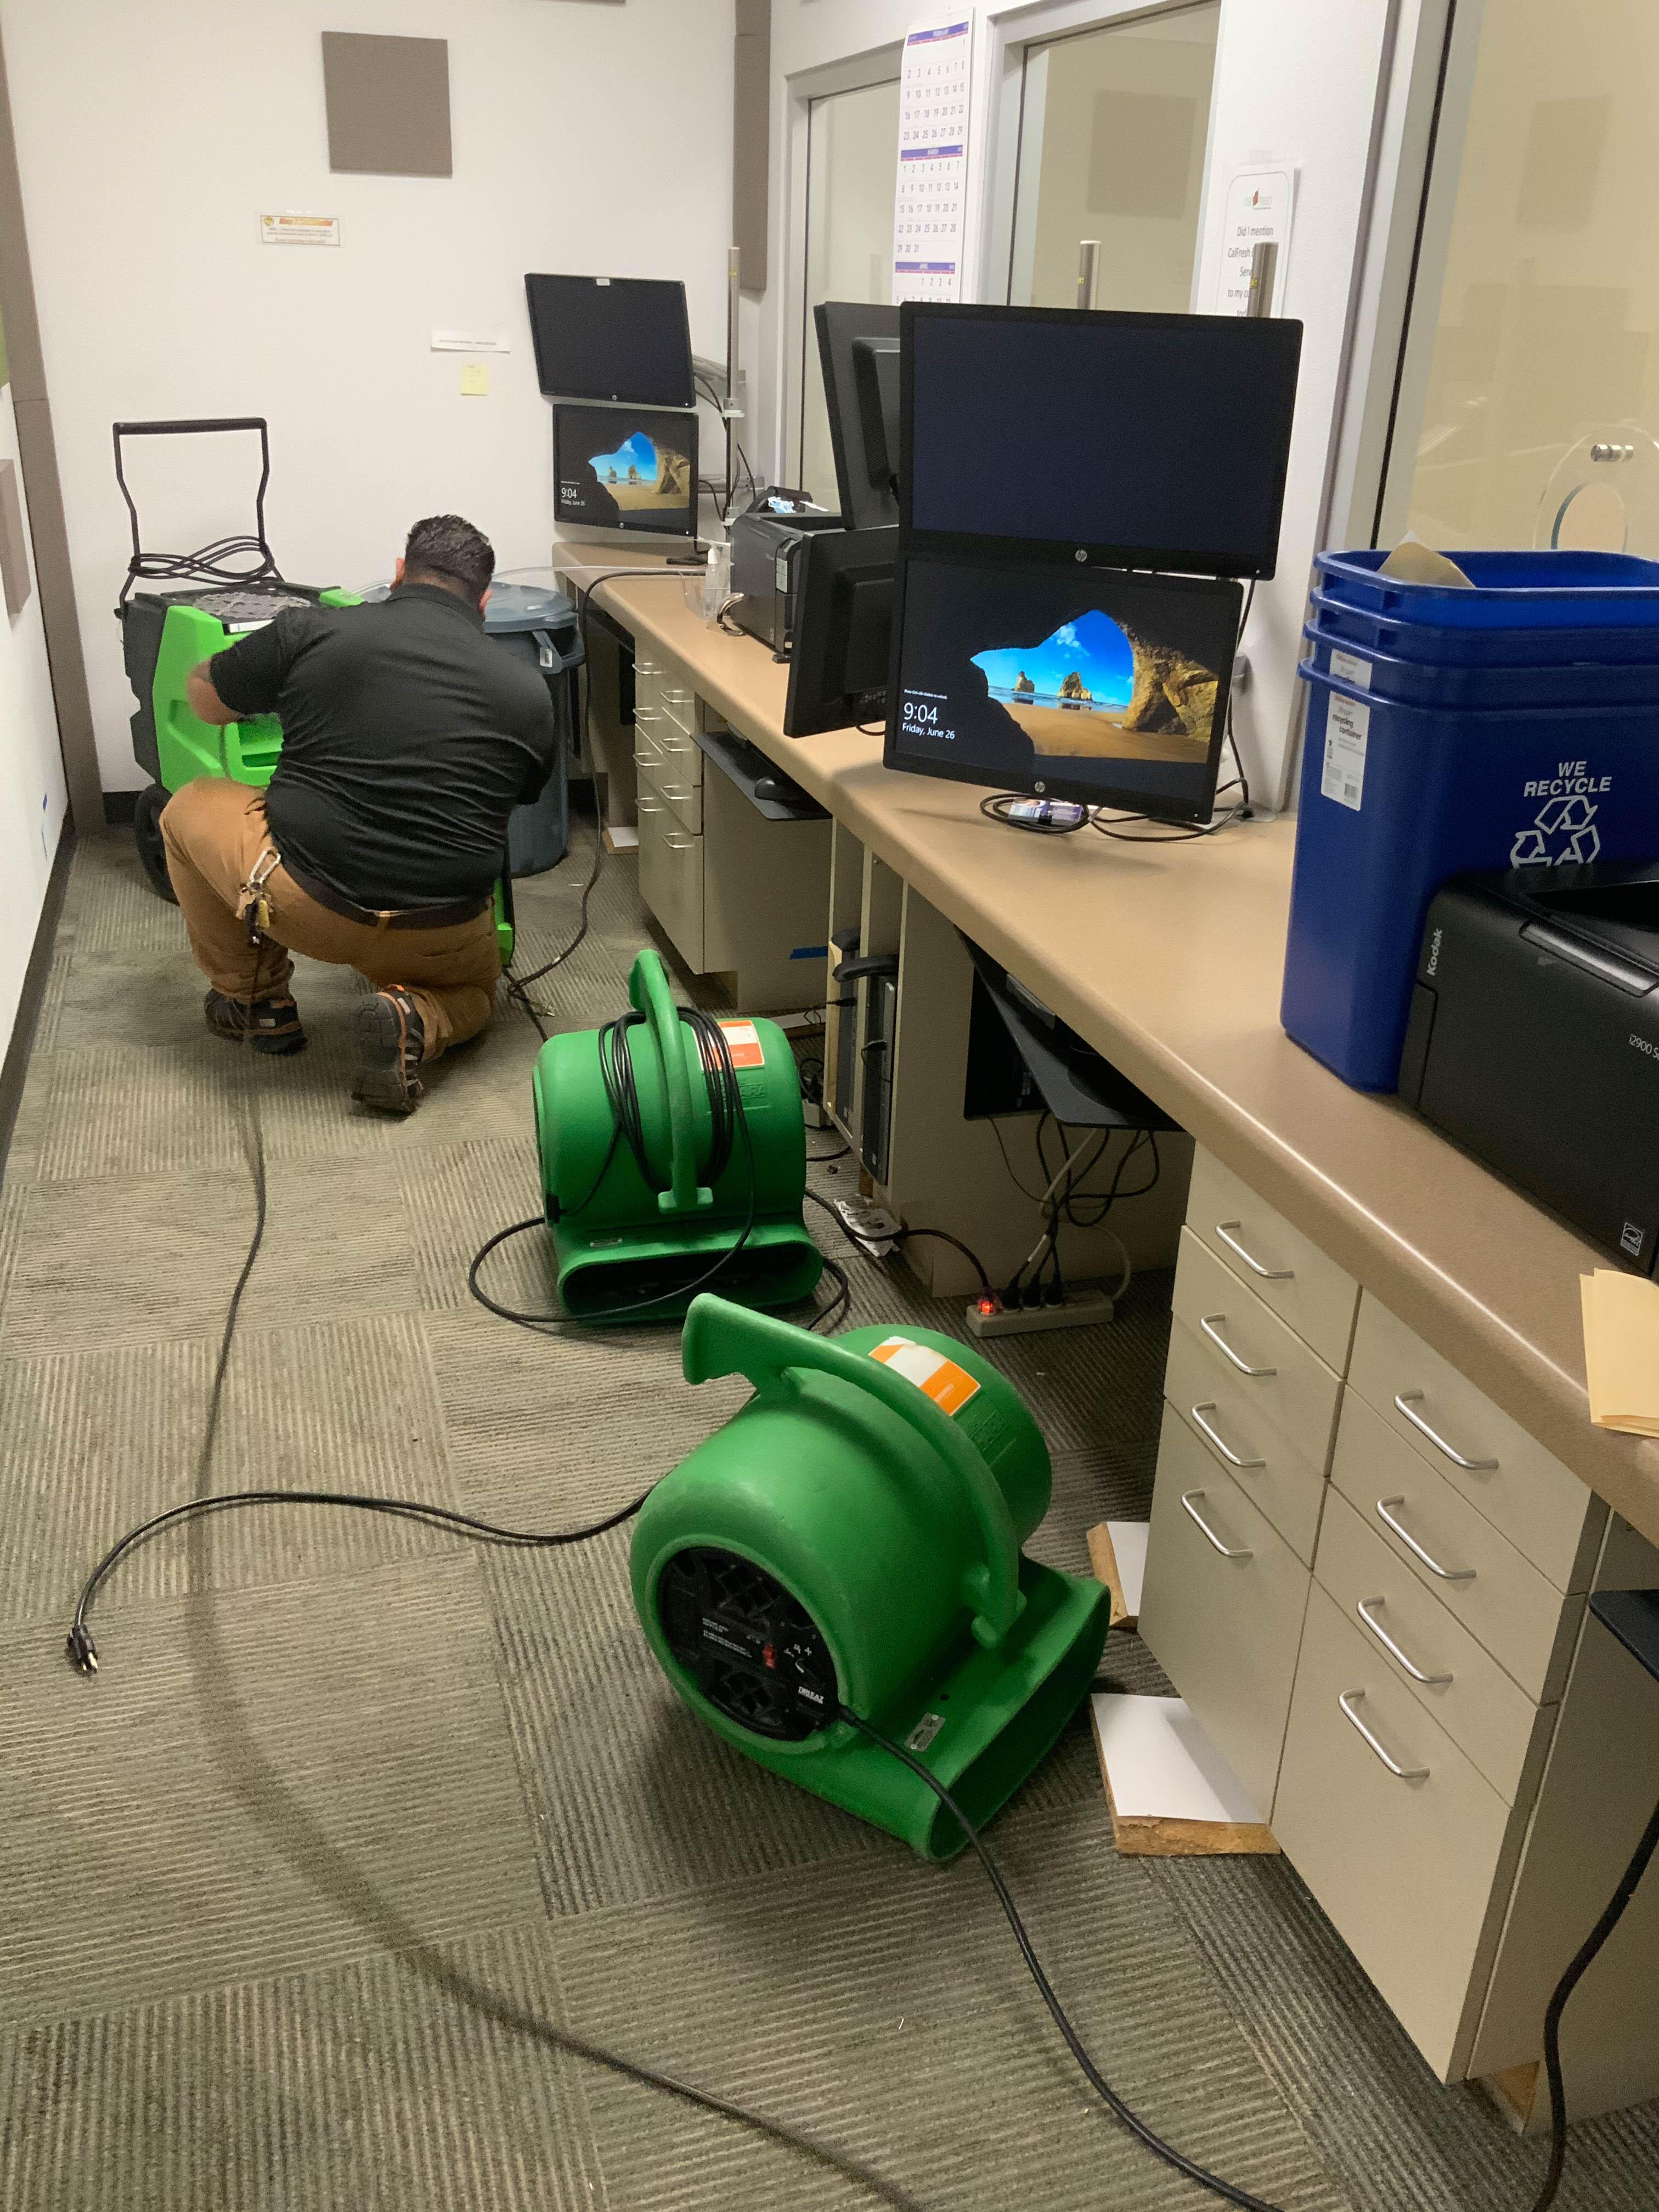 Water damage restoration is something our technicians work with on the daily. The SERVPRO of San Diego East team is at your beck & call 24/7, 365 days a year. Give us a call!